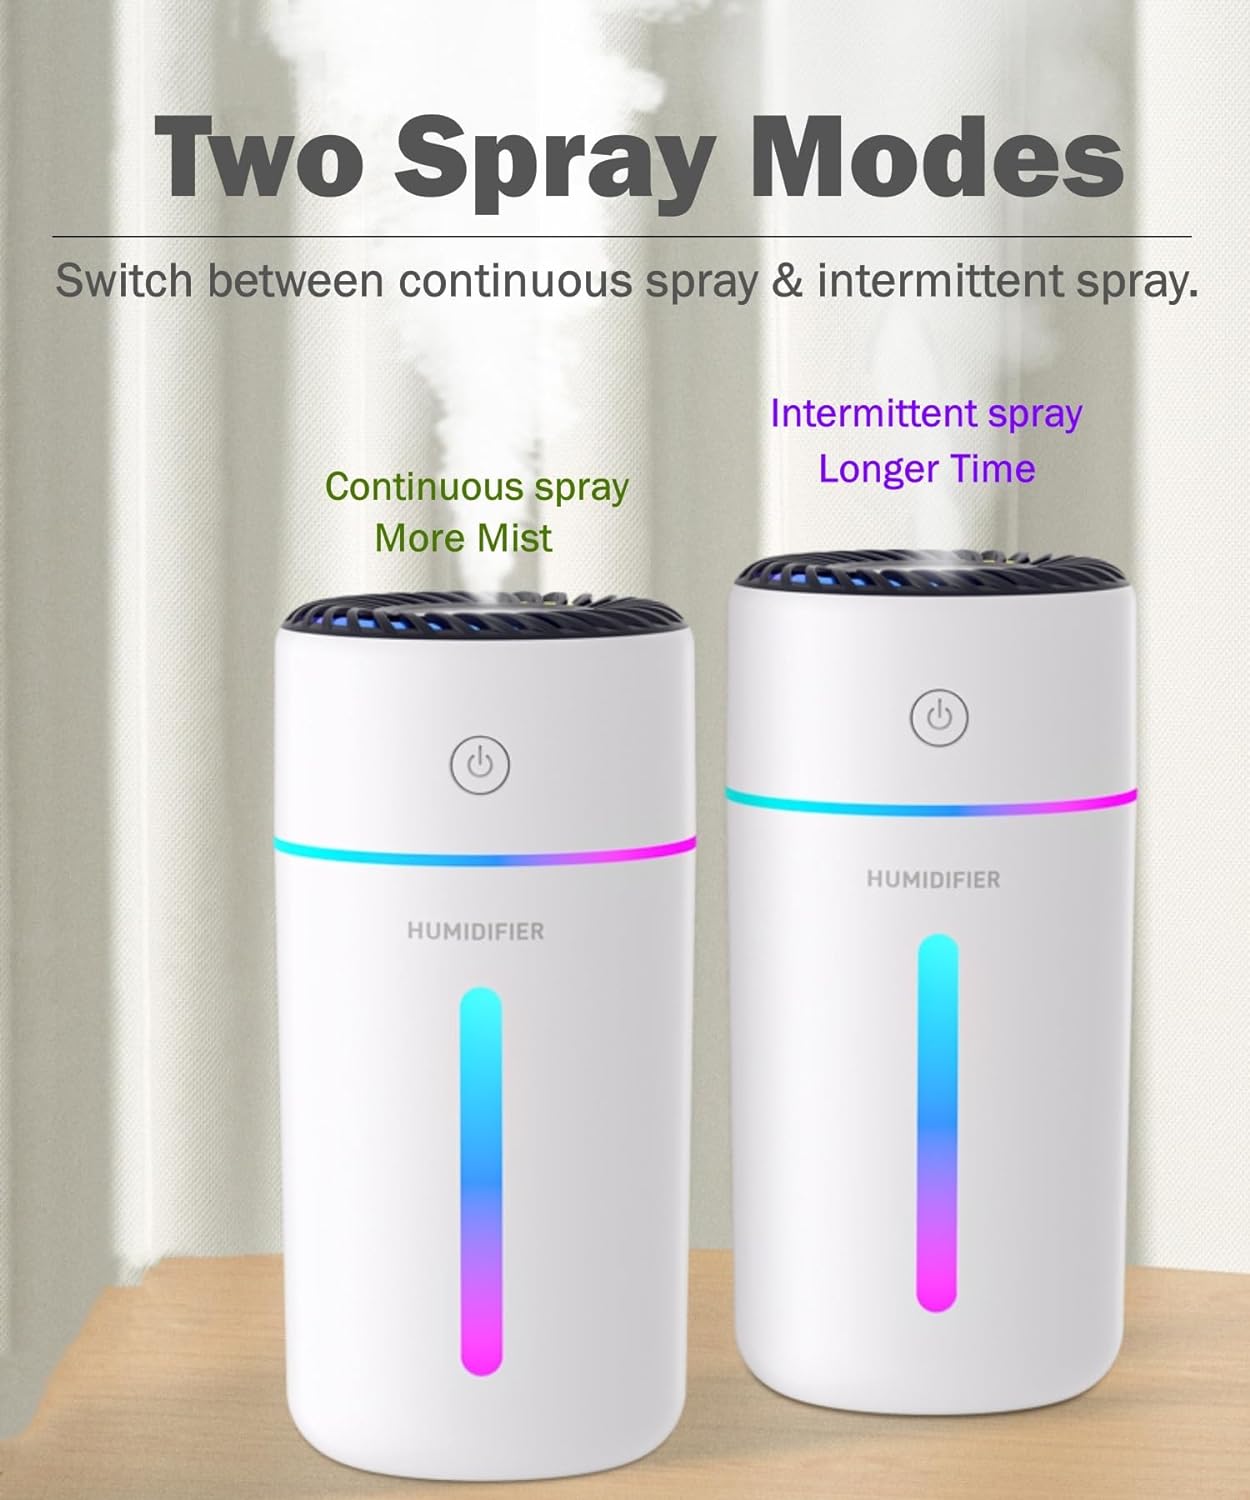 Mini Humidifier, 350ML Small Personal USB Cool Mist Humidifiers with Colorful Light, 2 Spray Modes, Auto Shut-Off, Ultra-Quiet Portable Air Humidifier for Car Home Bedroom Office Desktop (Clear)